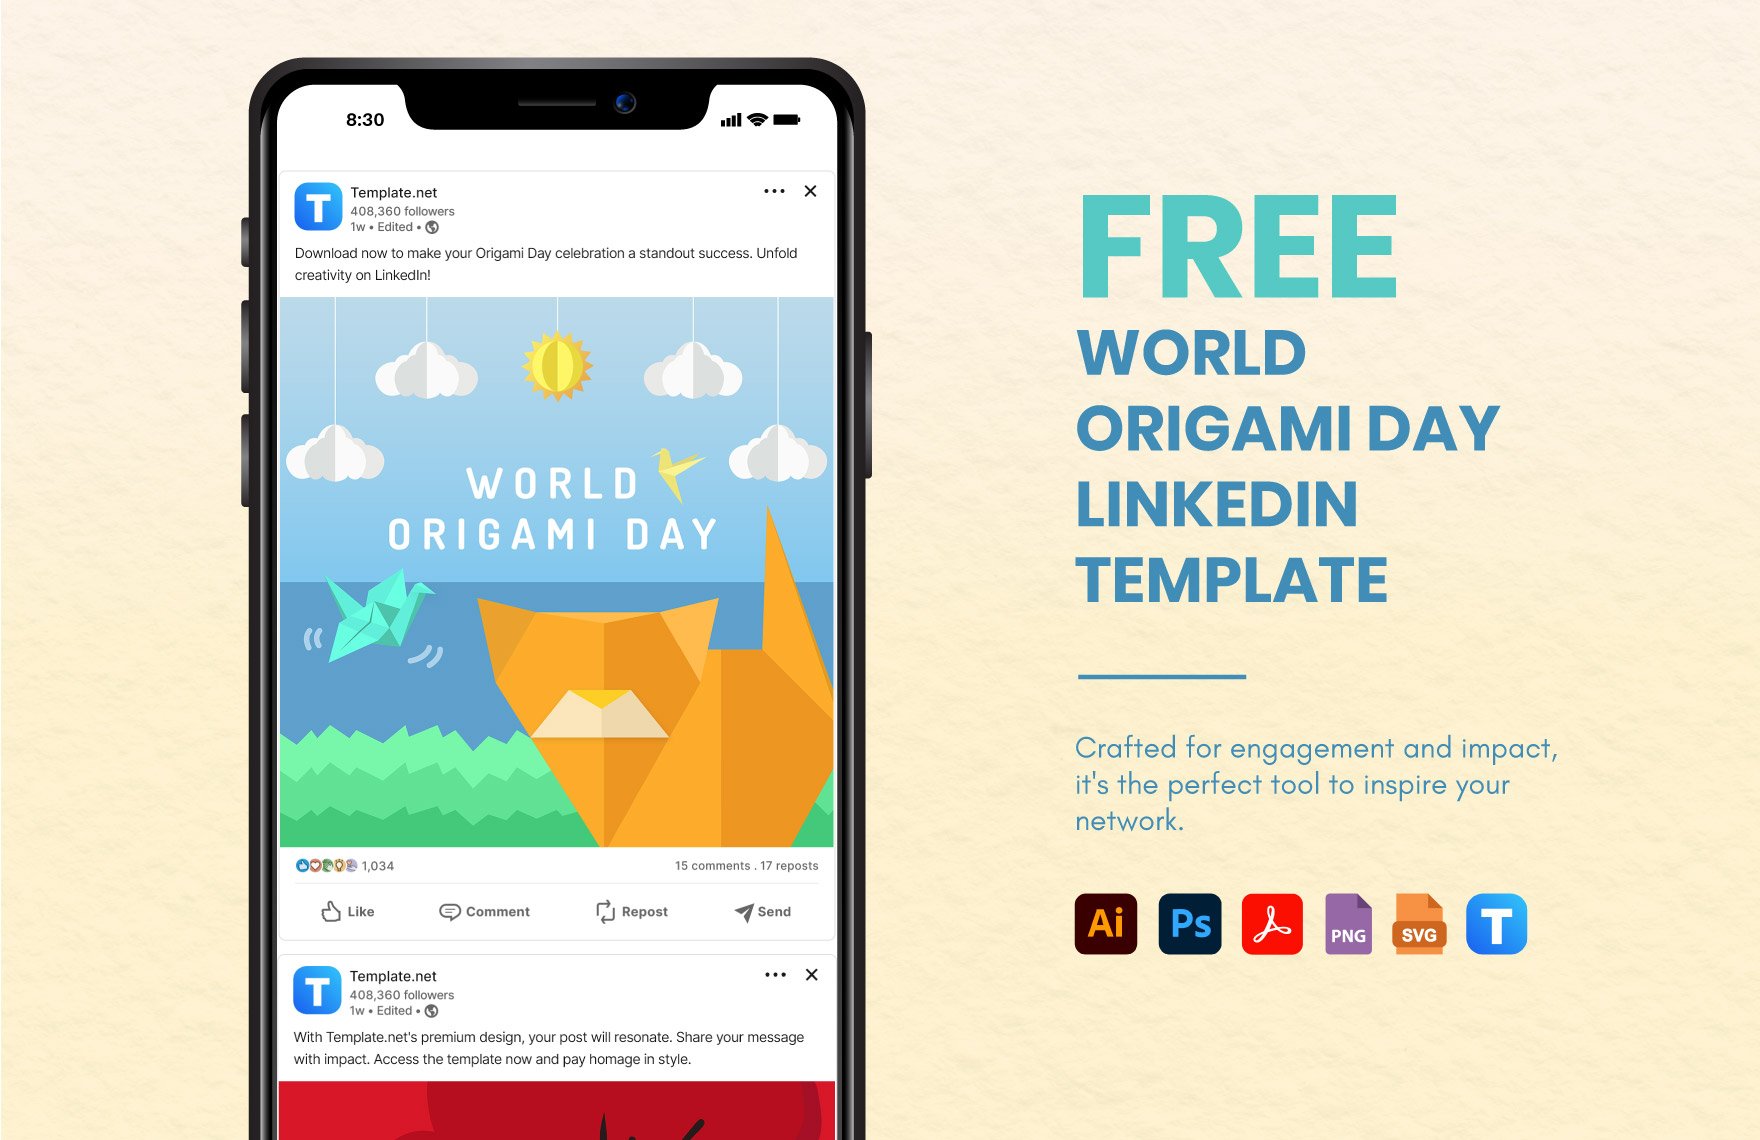 Free World Origami Day LinkedIn Post Template in PDF, Illustrator, PSD, SVG, PNG